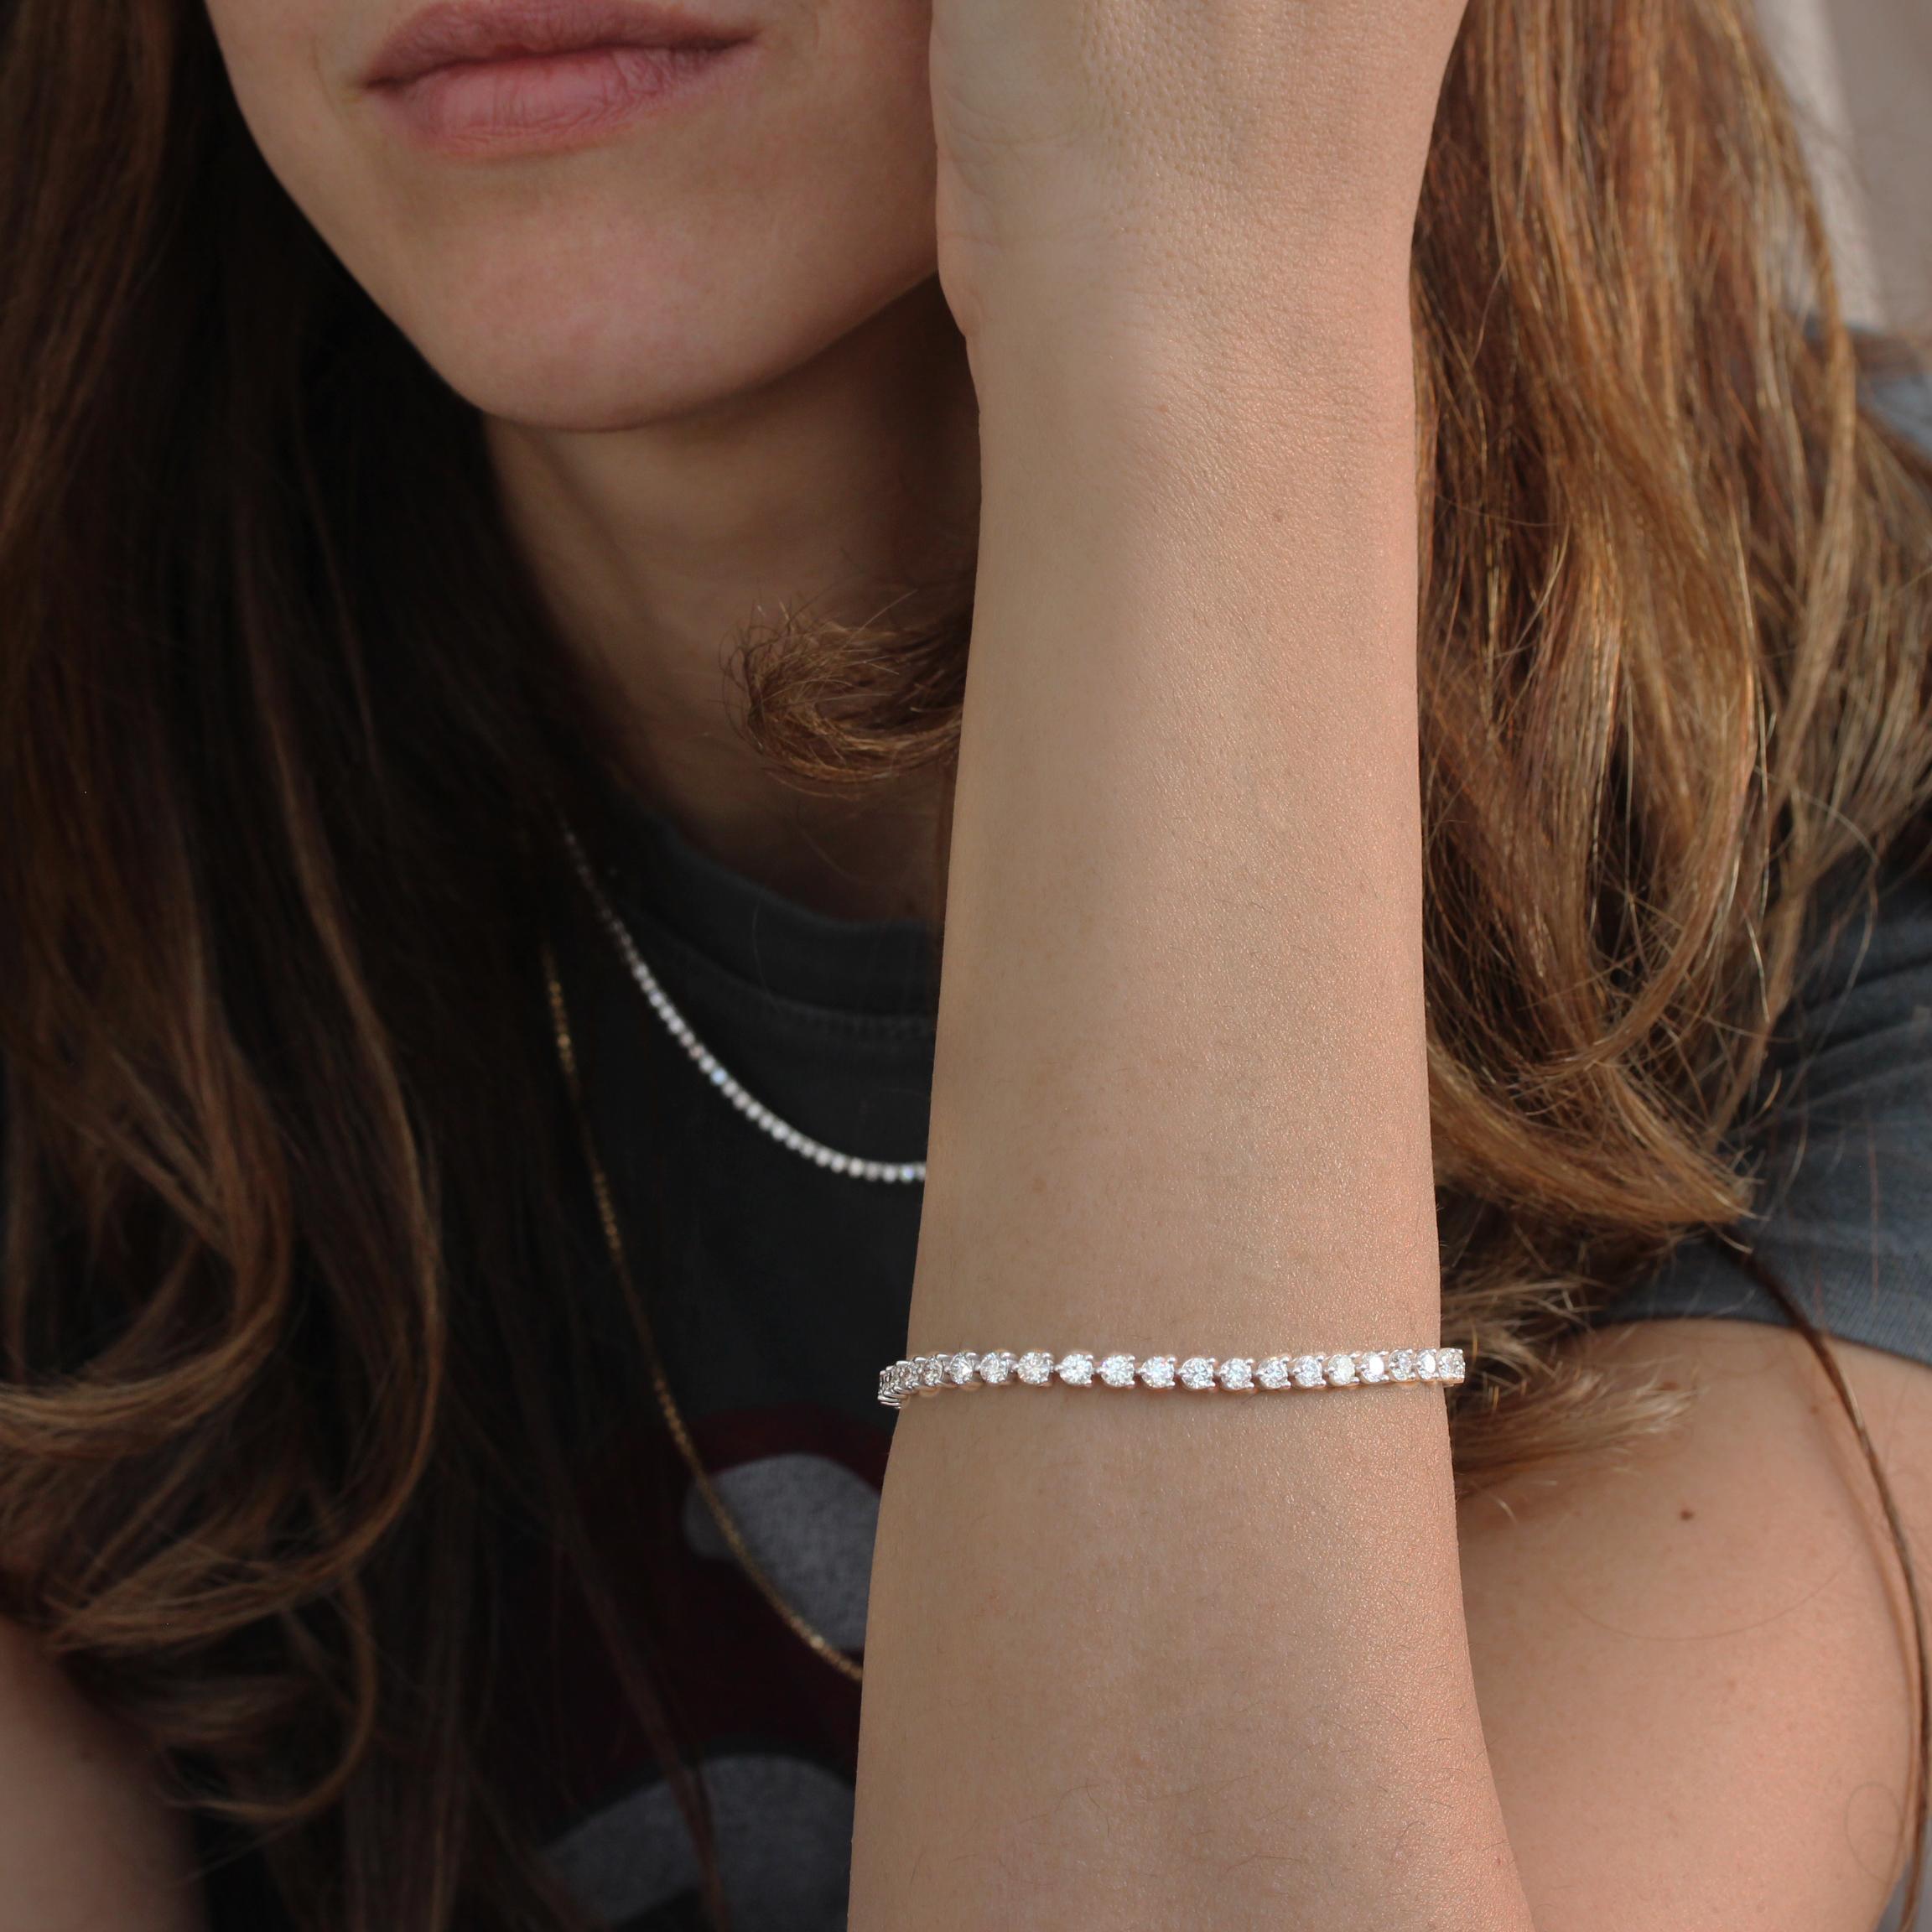 Indulge in understated elegance with our three-prong tennis bracelet. Its minimalist design showcases floating diamonds, each uniquely positioned with a delicate gap between them, allowing a graceful and radiant appearance.
Featuring a total of 7